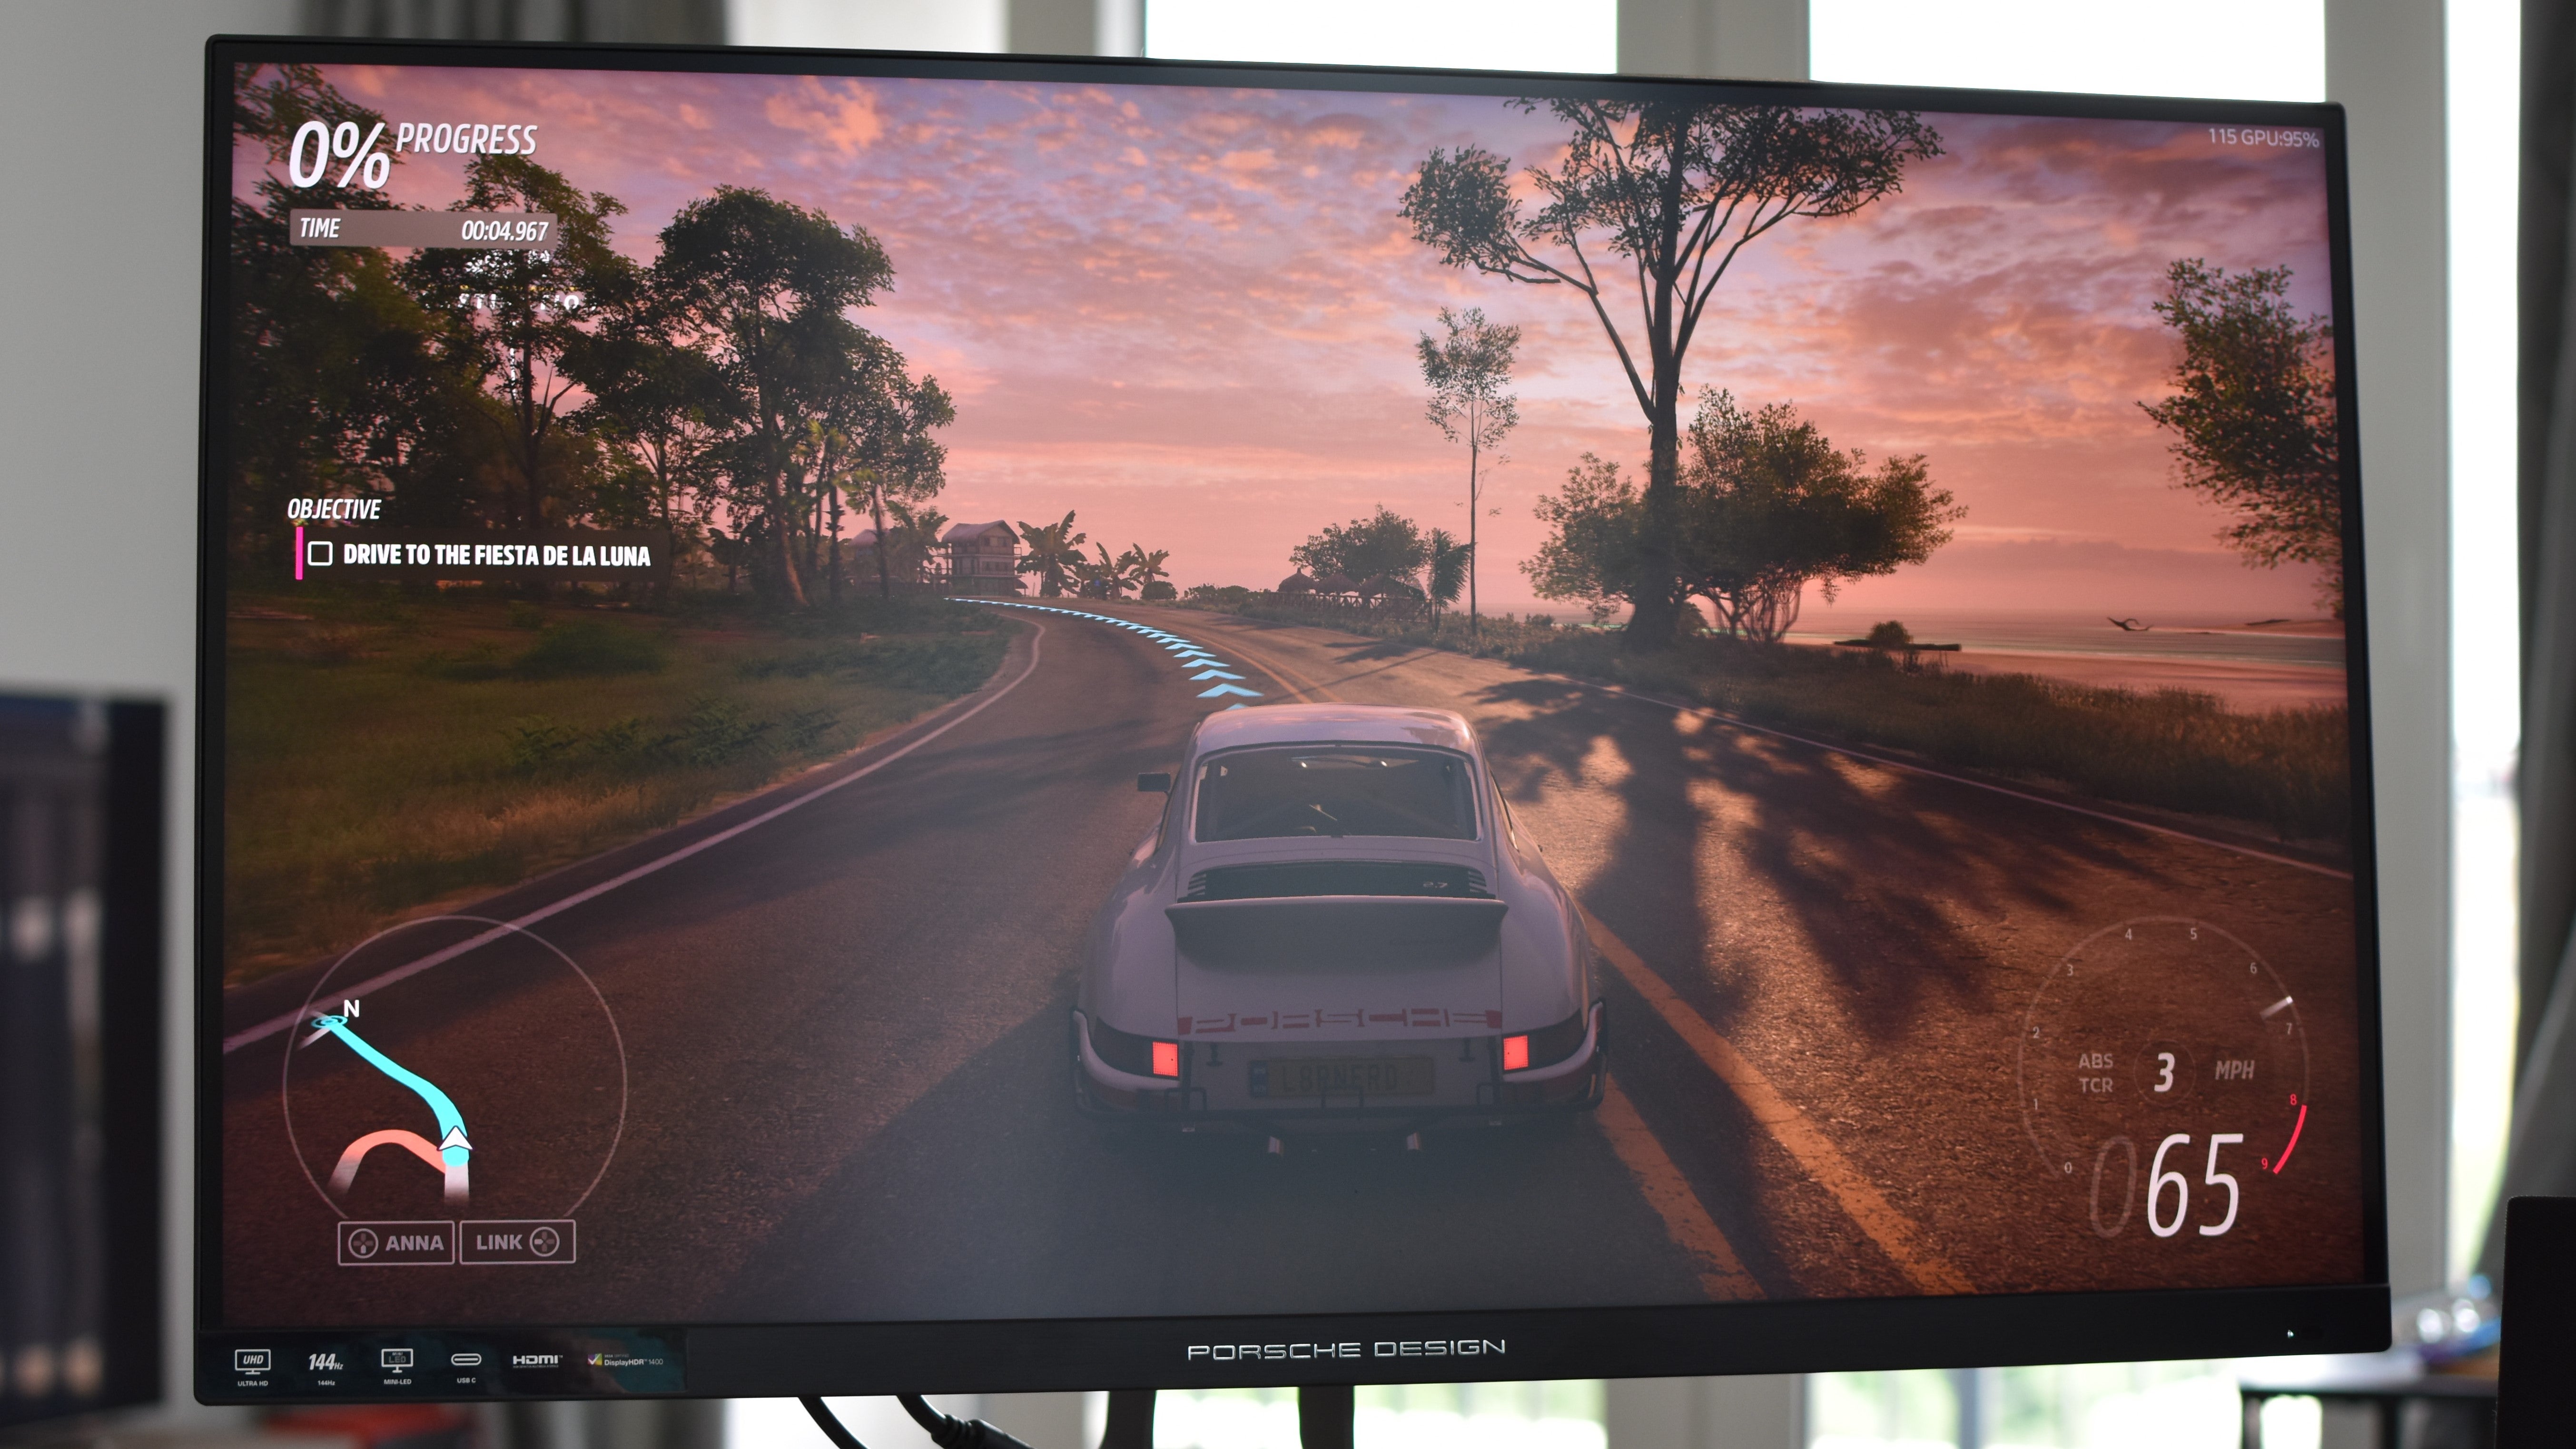 The Porsche Design AOC Agon Pro PD32M gaming monitor showing Forza Horizon 5 in action.